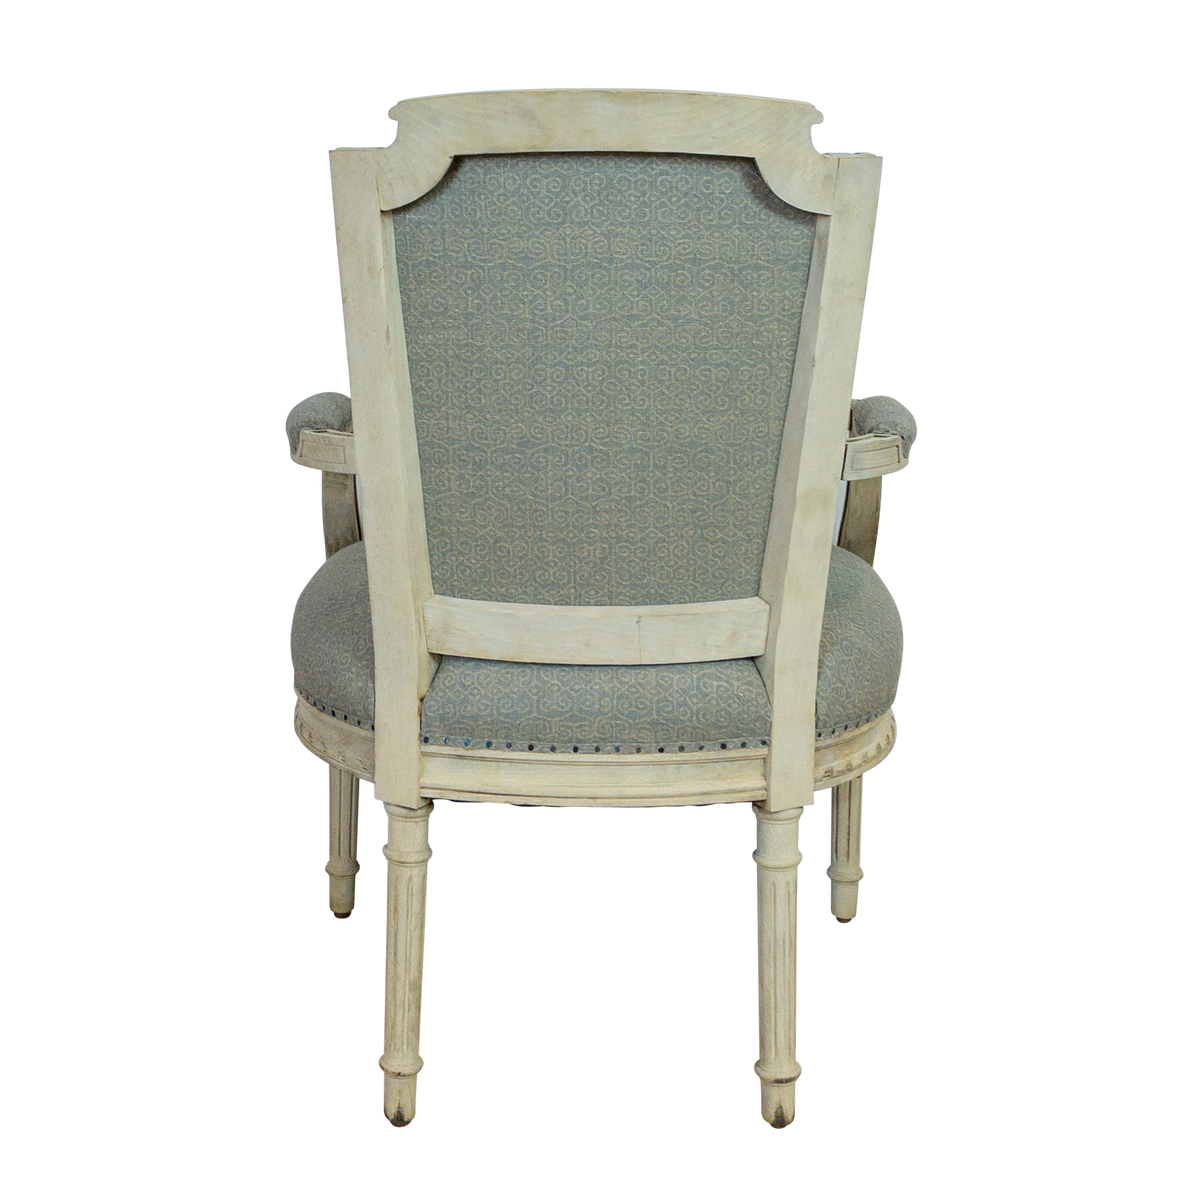 Kerry French Bergere Chairs - Pair